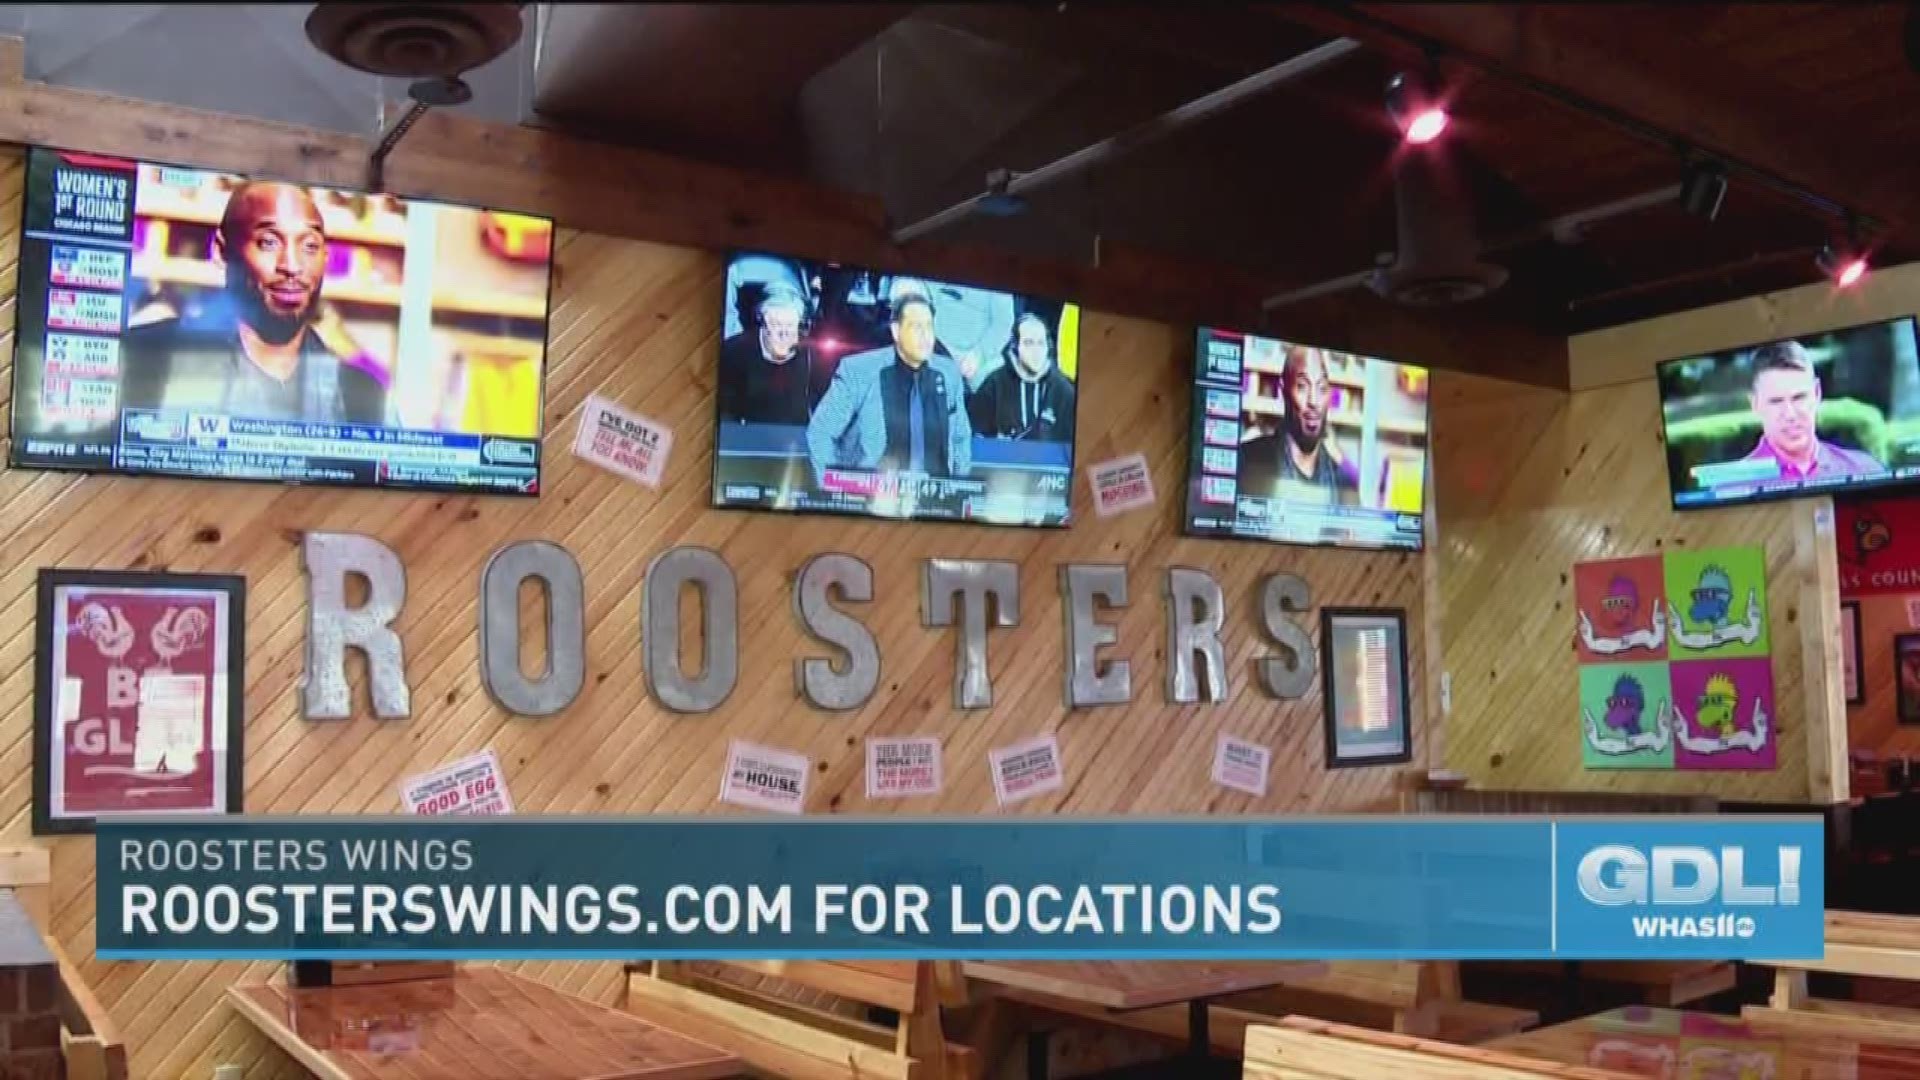 Rooster's is the perfect place for the whole family to enjoy watching NCAA basketball and eating good food.